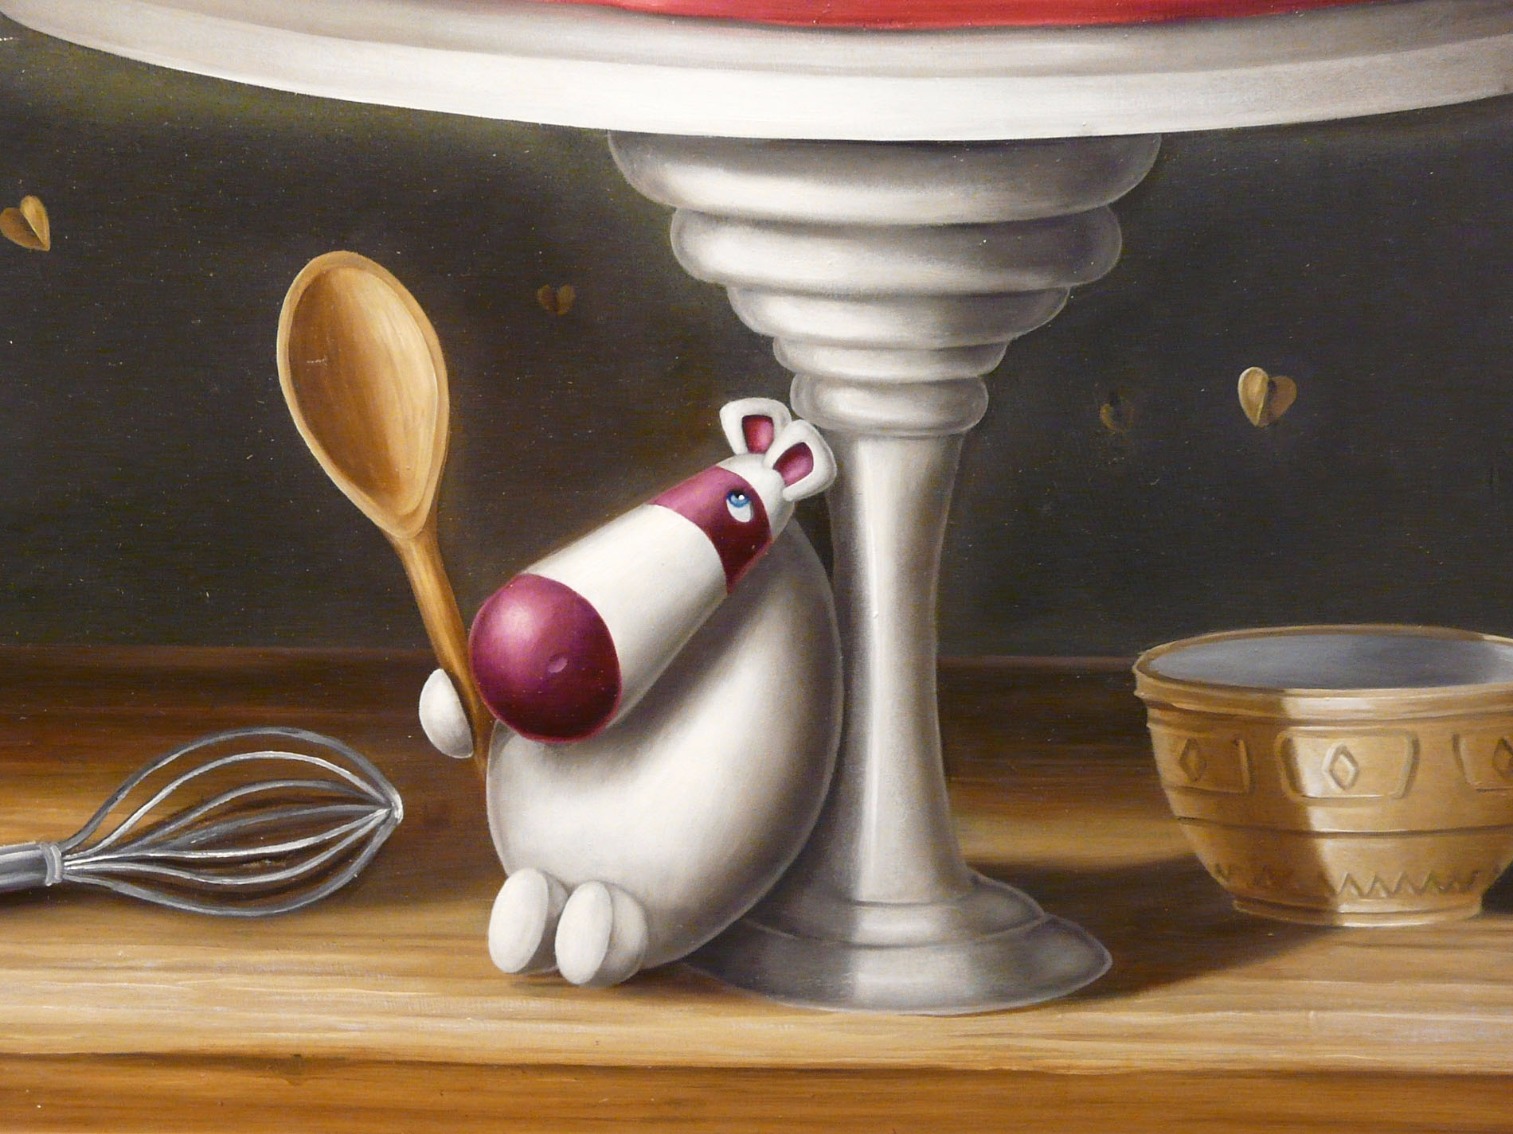 Bake off by Peter Smith, Naive | Family